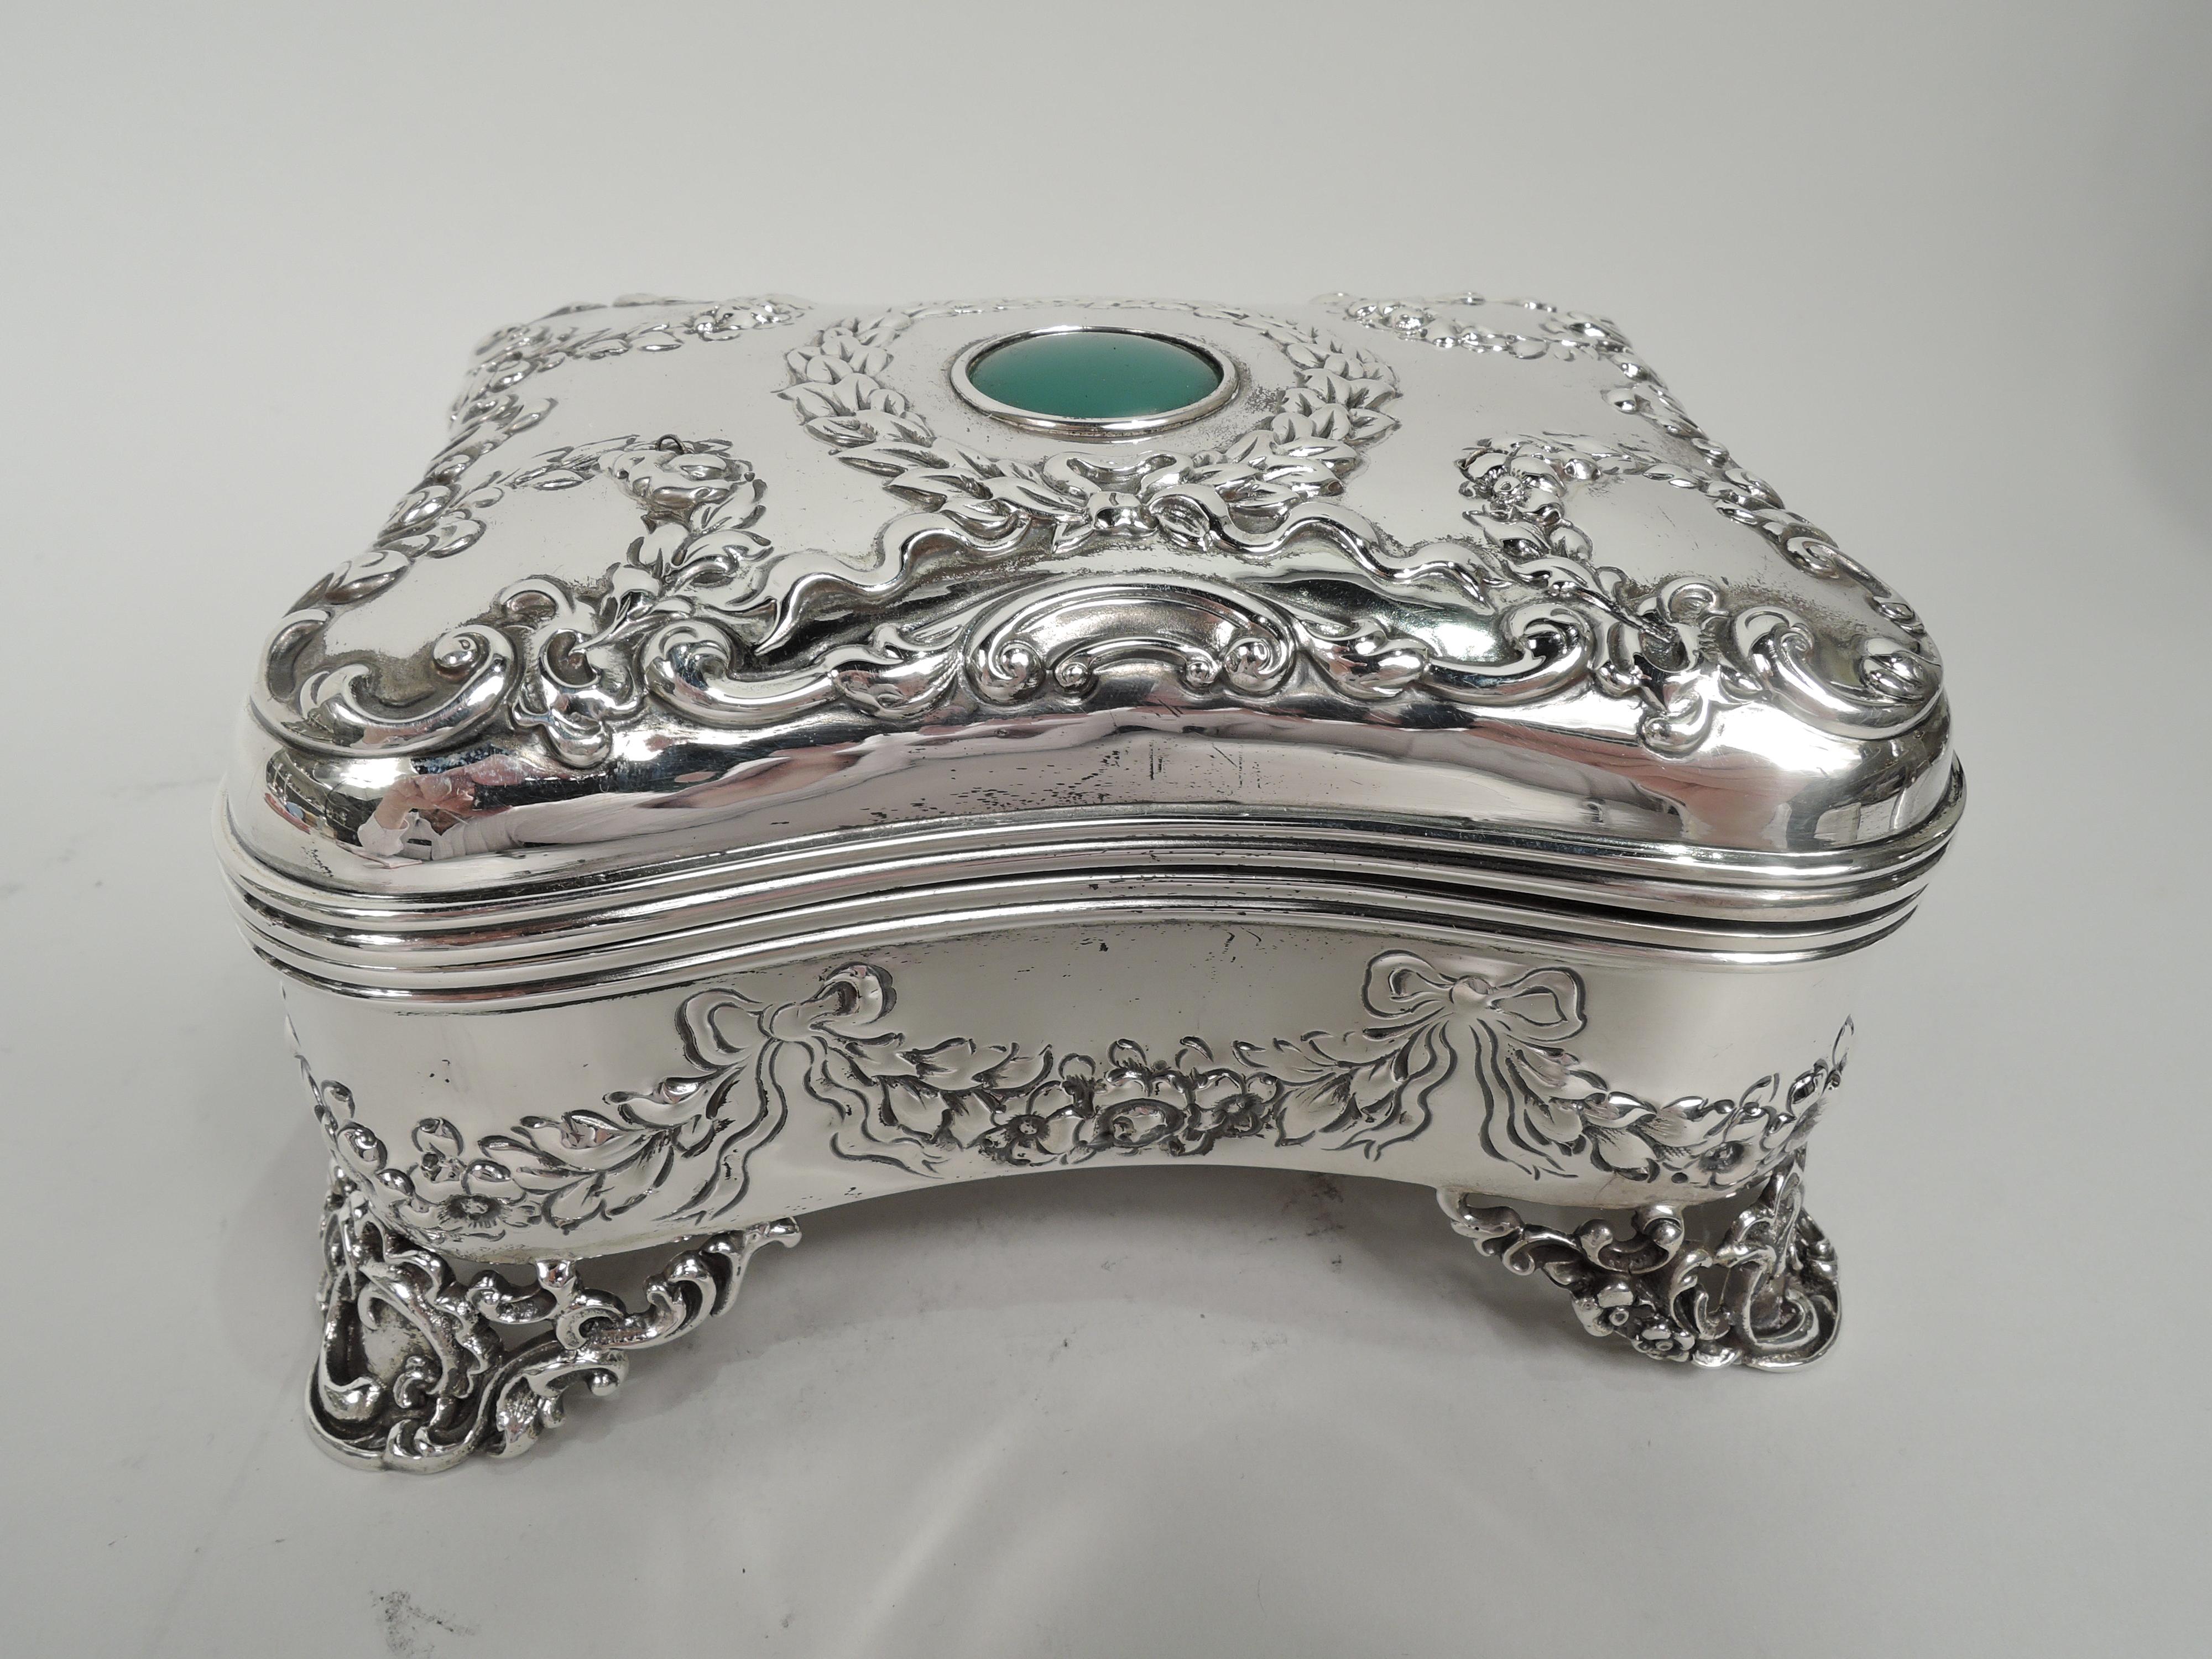 Turn-of-the-century Victorian Regency sterling silver jewelry box. Made by Mauser in New York. Rectangular and concave with curved corners and hinged cover. Chased ornament including garlands and scrollwork. On cover top is inset green hardstone